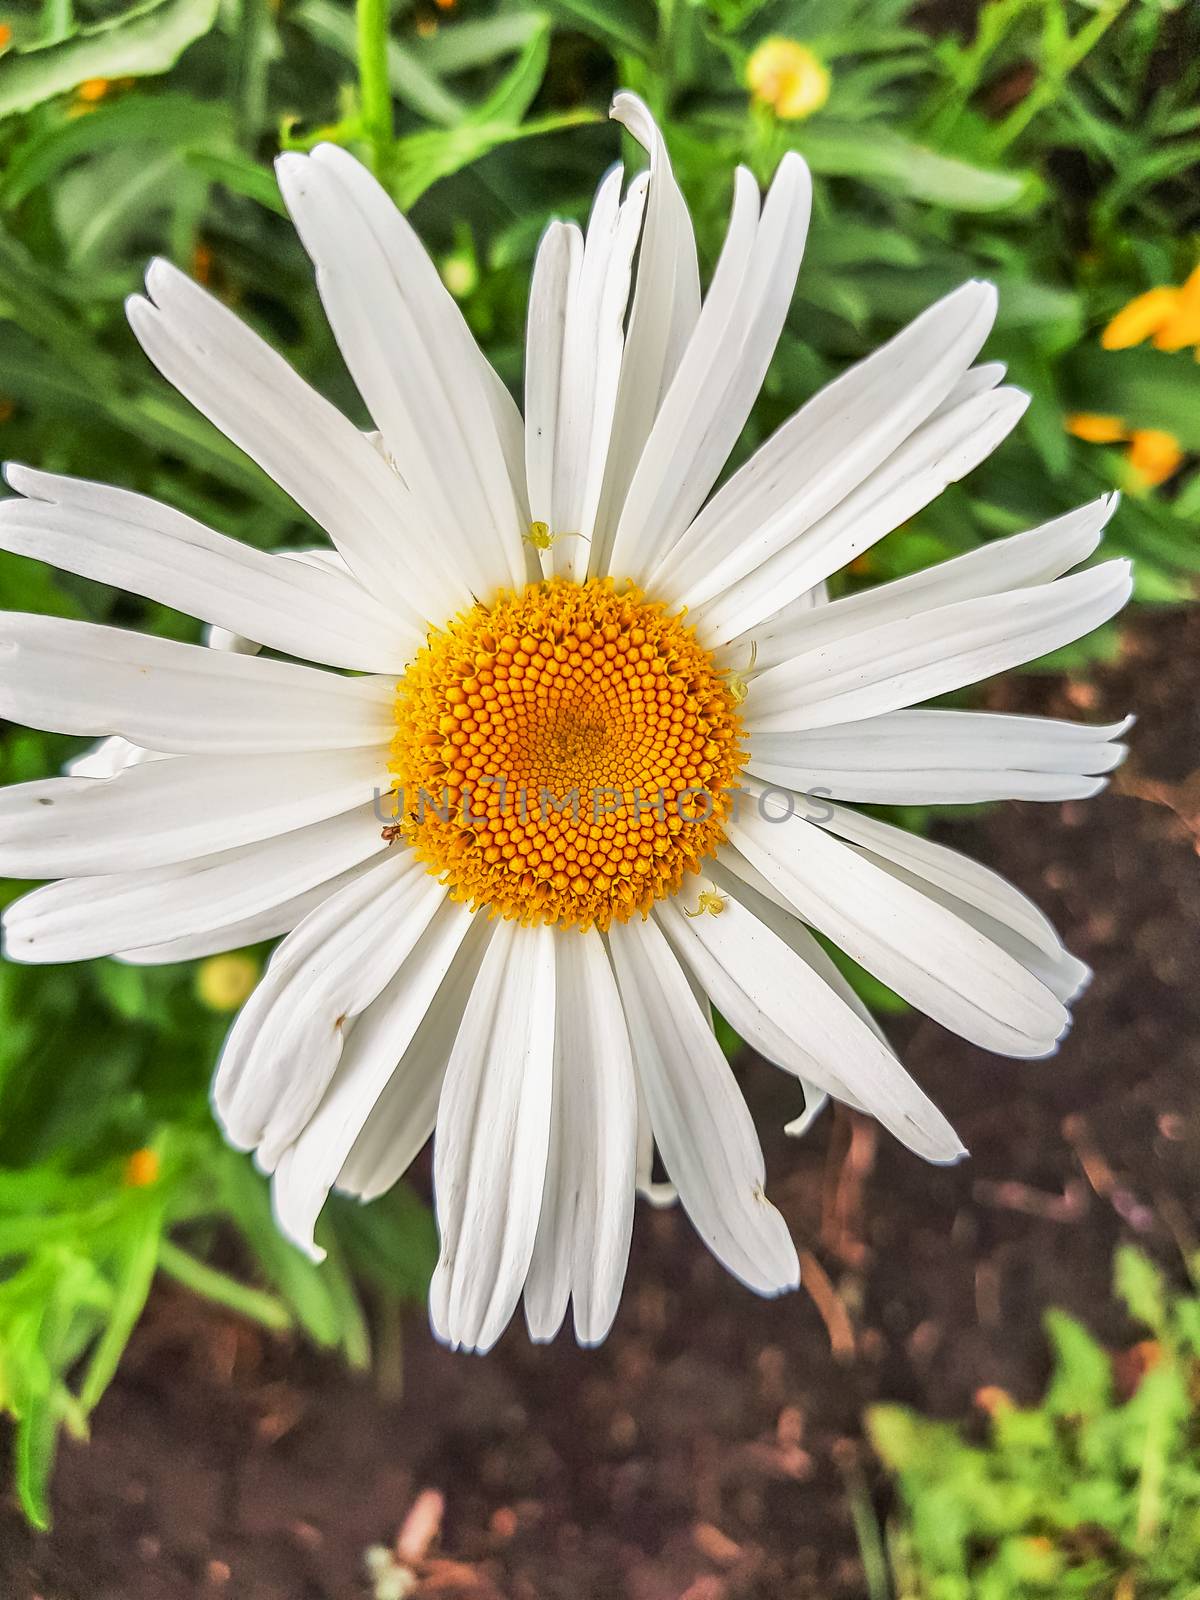 Close-up of a single Daisy flower and insect pests, outdoor, summer Sunny day, vertical frame.